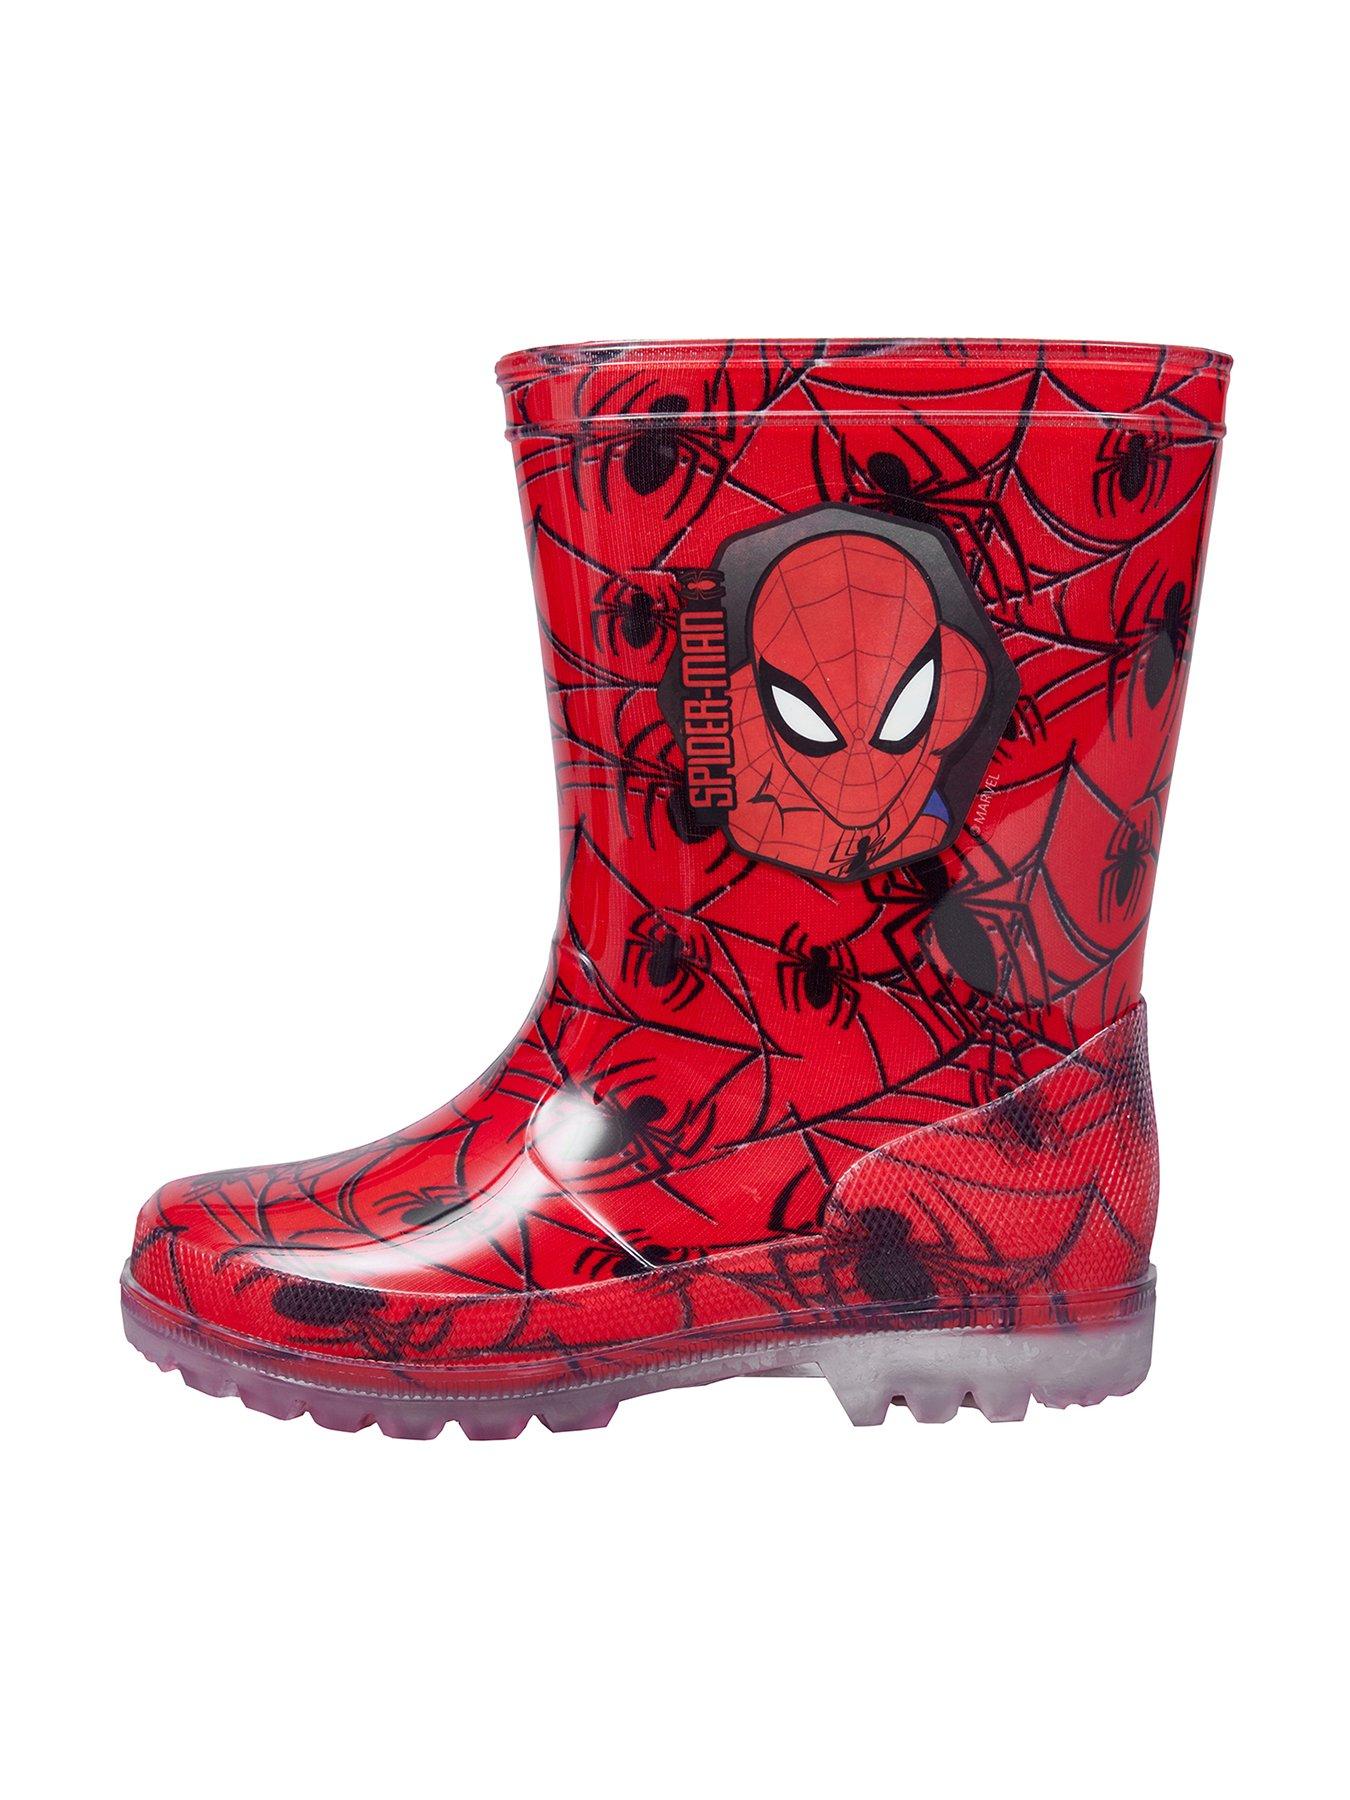 After Midnight Red Paisley Ankle Red Bottom Boots Sizes 8-13 12